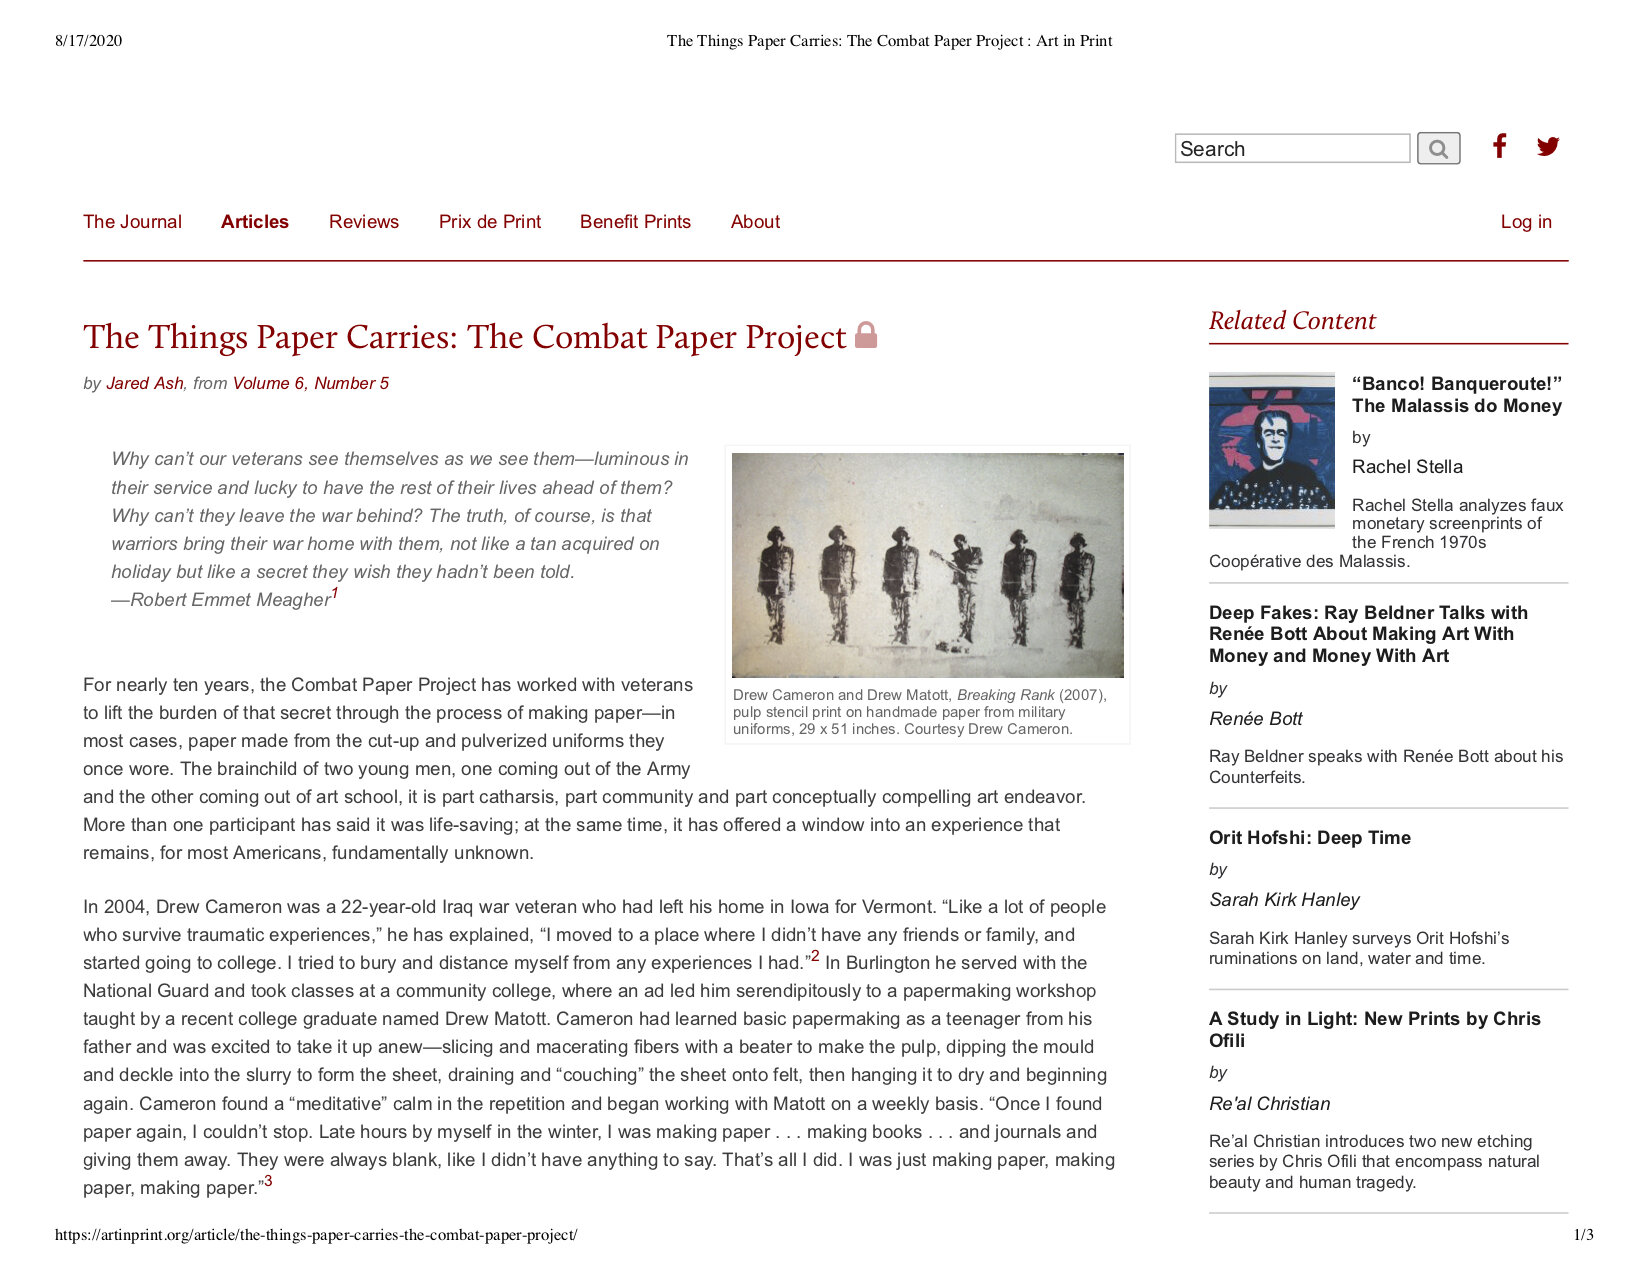 The Things Paper Carries_ The Combat Paper Project _ Art in Print.jpg